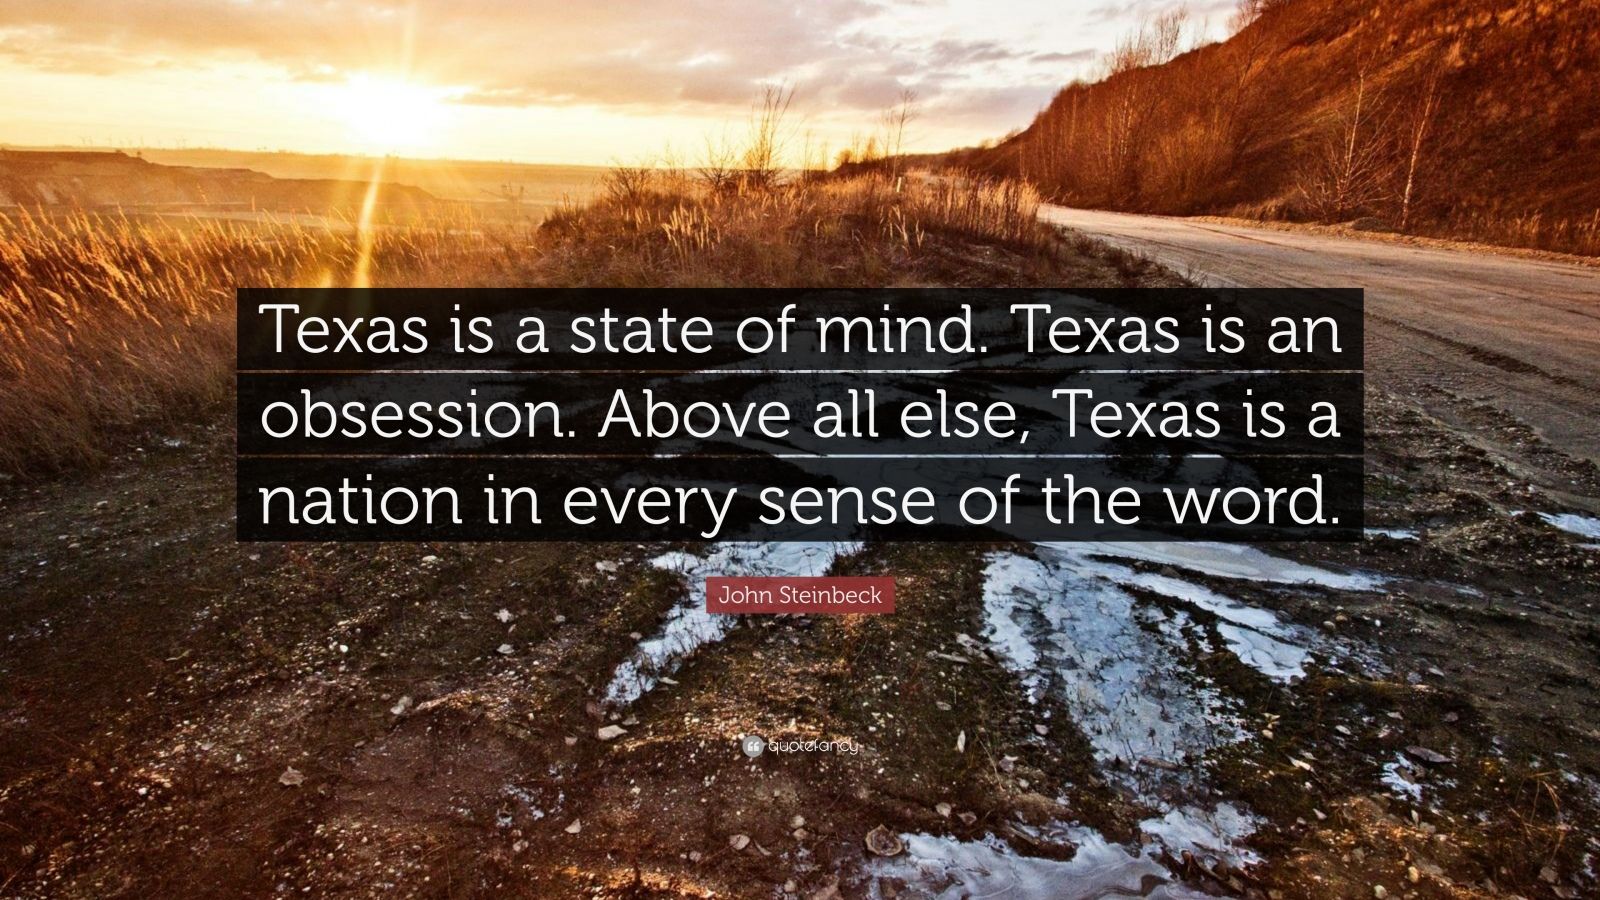 Texas is a State of Mind': How the Famed Quote by John Steinbeck Came To Be